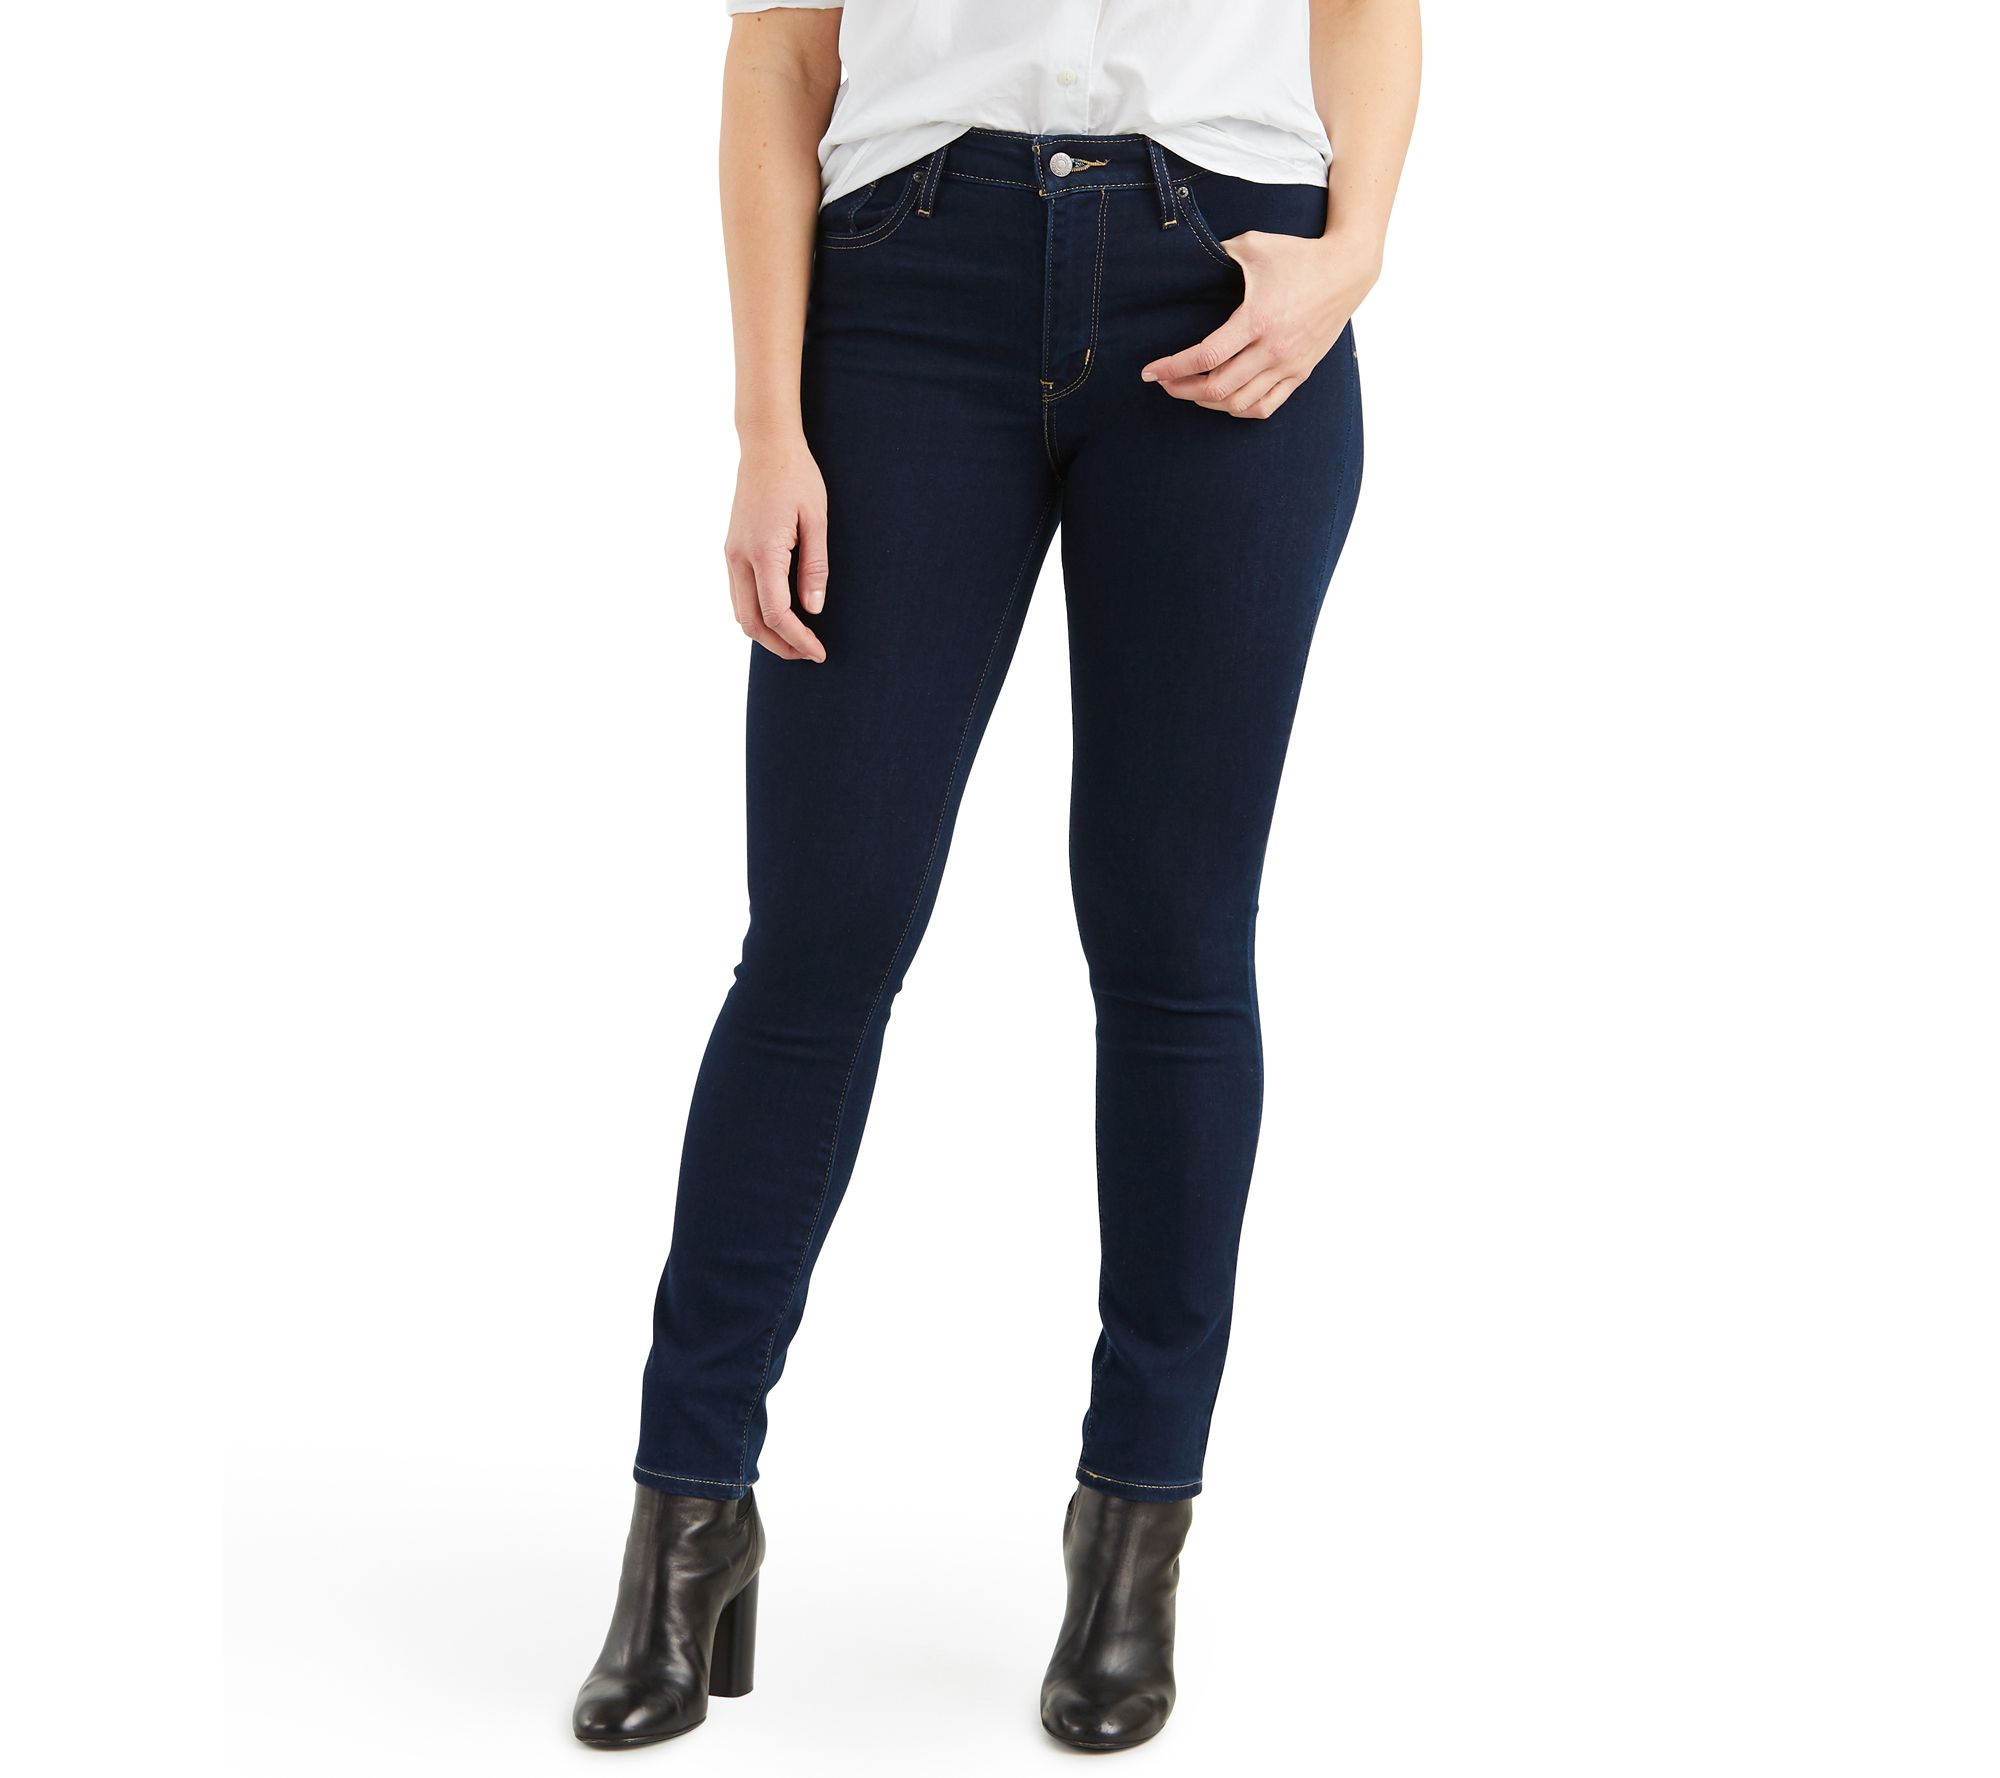 Levi's 721 High Rise Skinny Jeans 